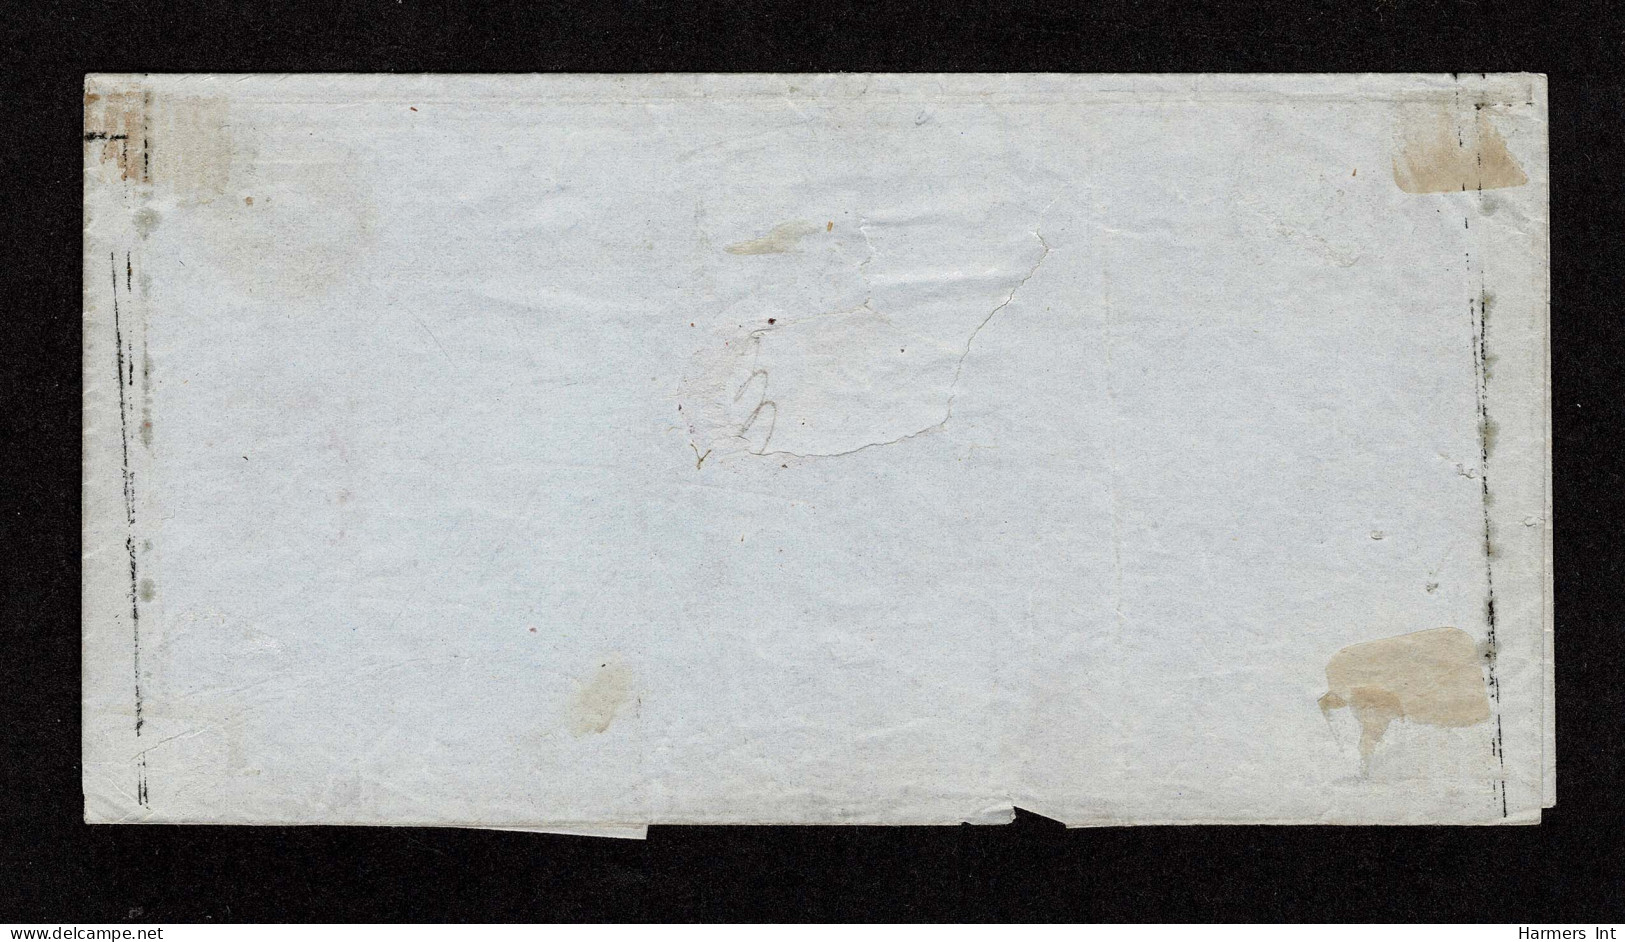 Lot # 017 THREE COVERS (2-folded letter sheets and 1 envelope) bearing 1847 5¢ red brown